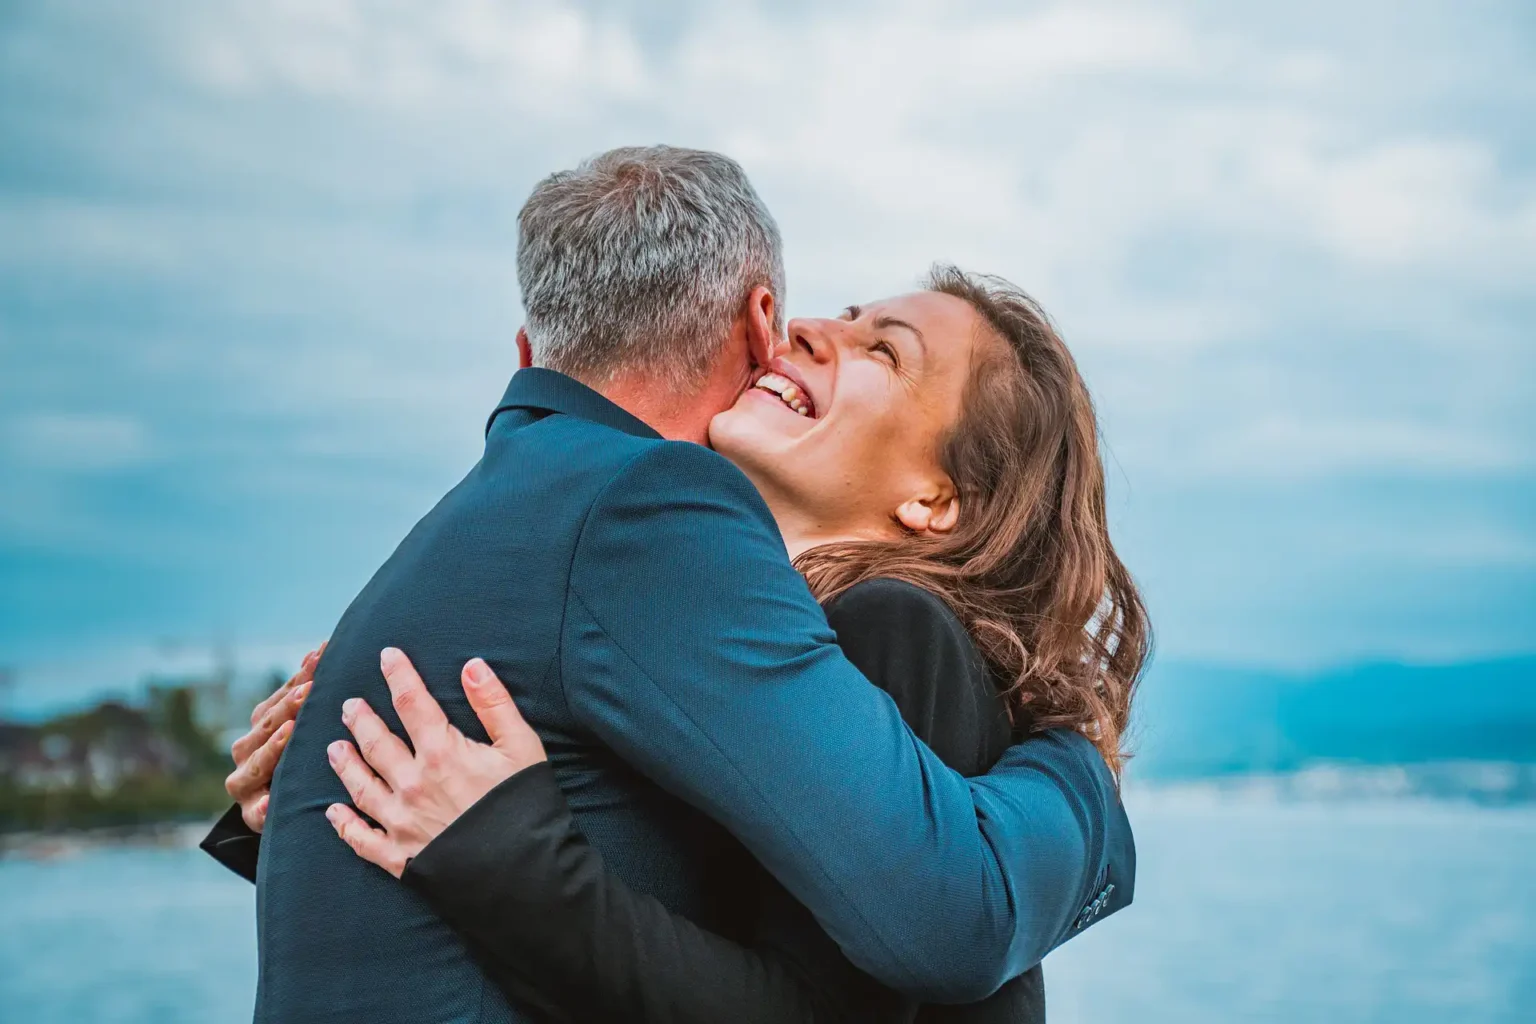 In the picture, a man and a woman hugging. The woman is smiling. In the background there is the sea.